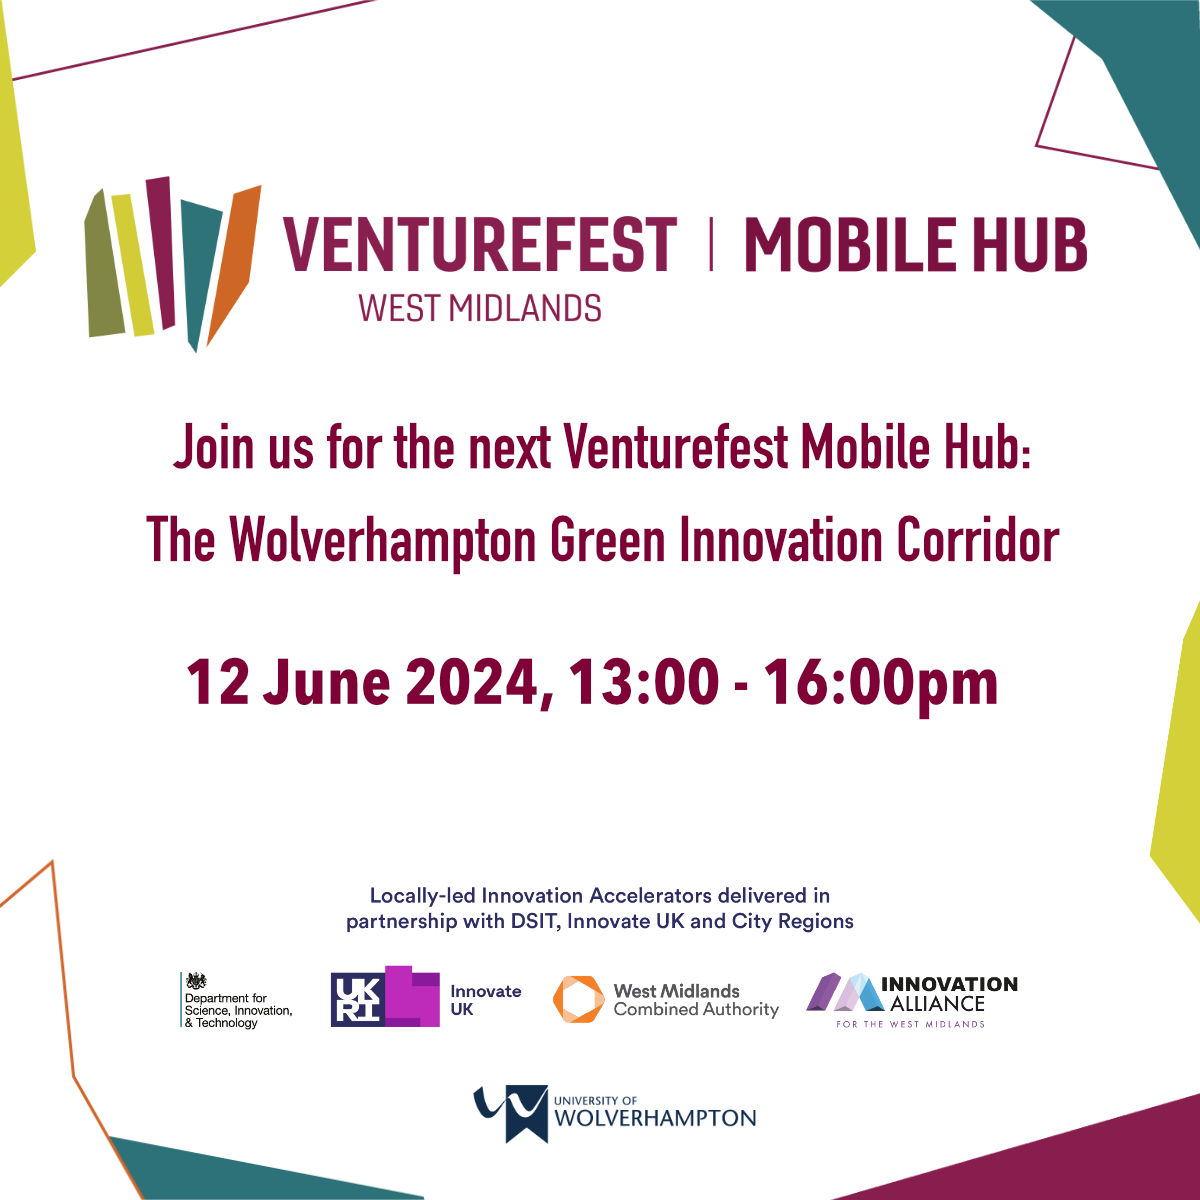 🚀 Join us on June 12 at the National Brownfield Institute to find out about developments and opportunities from the Wolverhampton Green Innovation Corridor. eventbrite.co.uk/e/venturefest-… #WMPlanforGrowth #WestMidlandsInnovation #WMIP